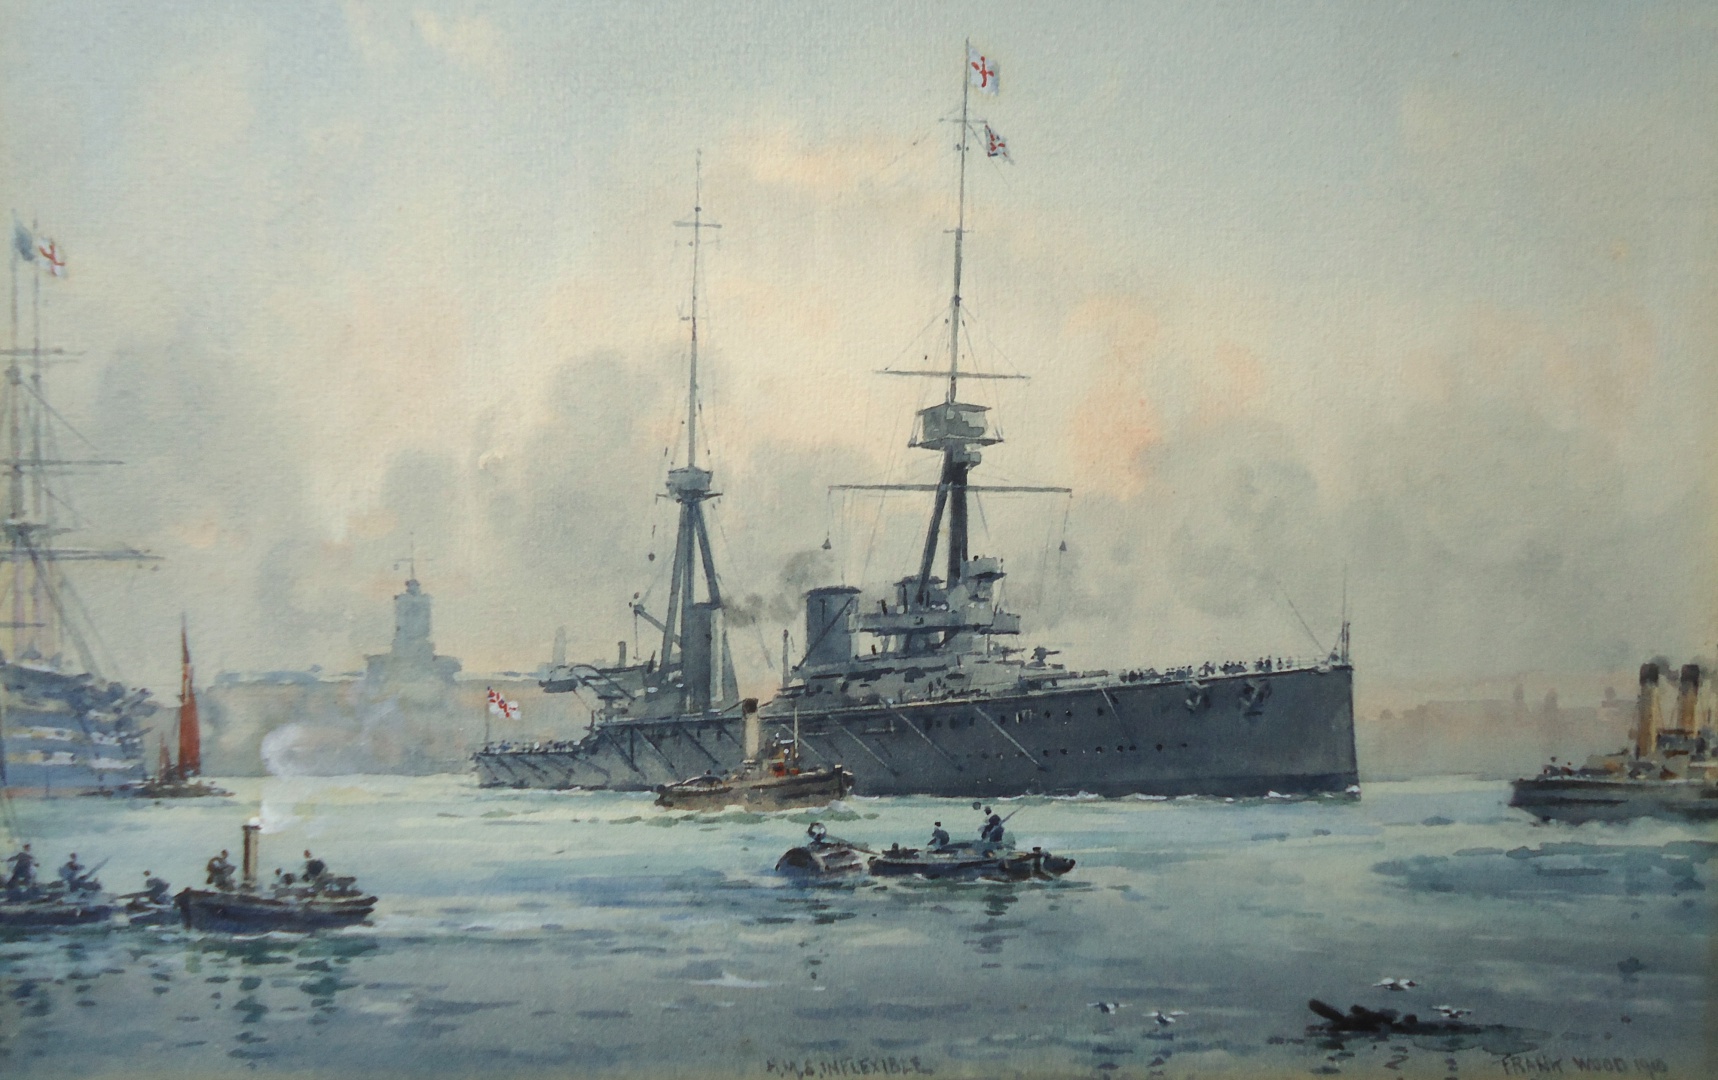 HMS INFLEXIBLE leaving Portsmouth.